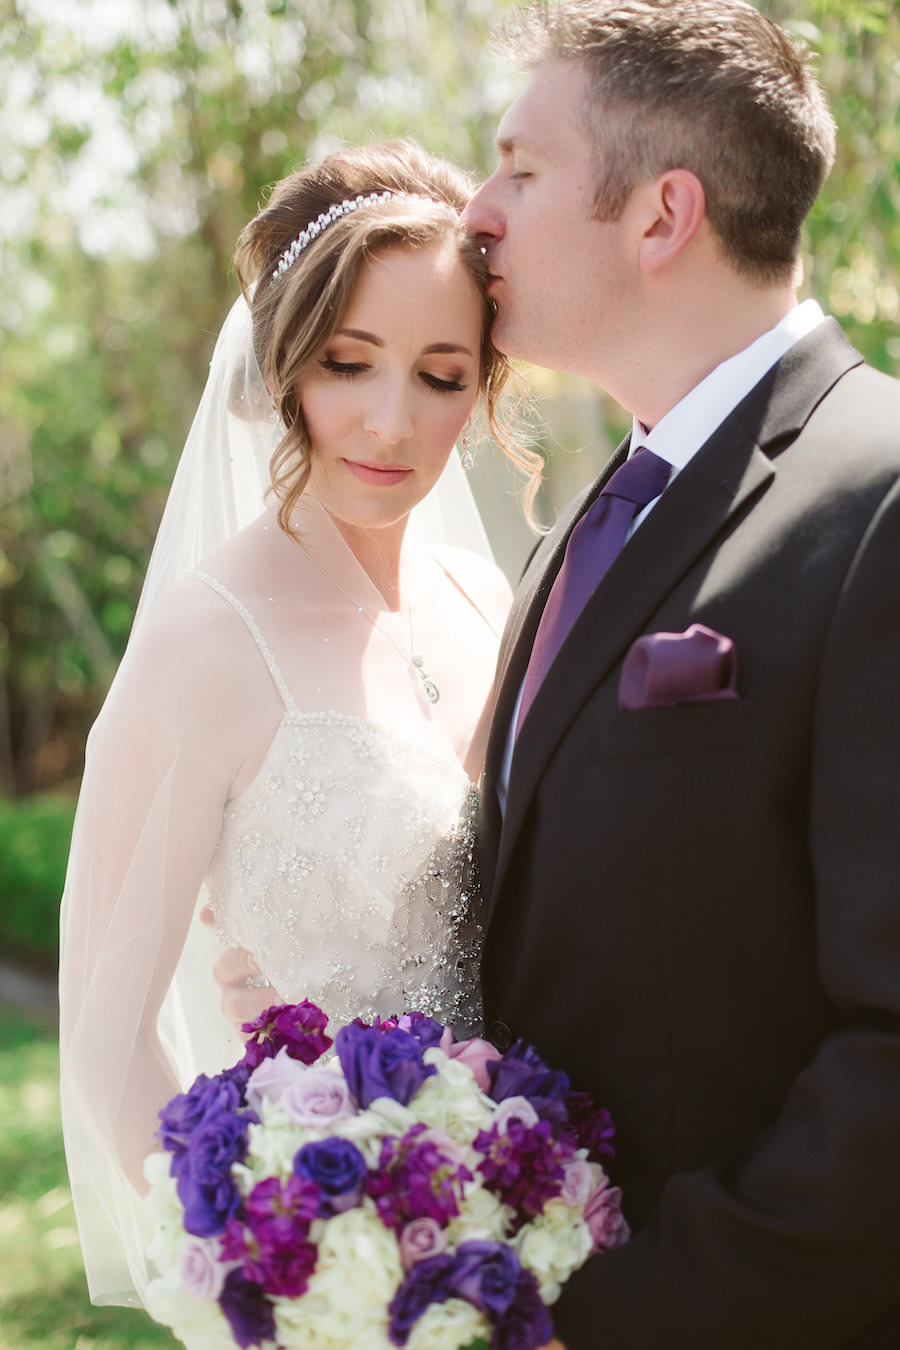 Bride and Groom Wedding Portrait with Purple, Lilac and White Wedding Bouquet | | Clearwater Beach Wedding Florist Iza's Flowers